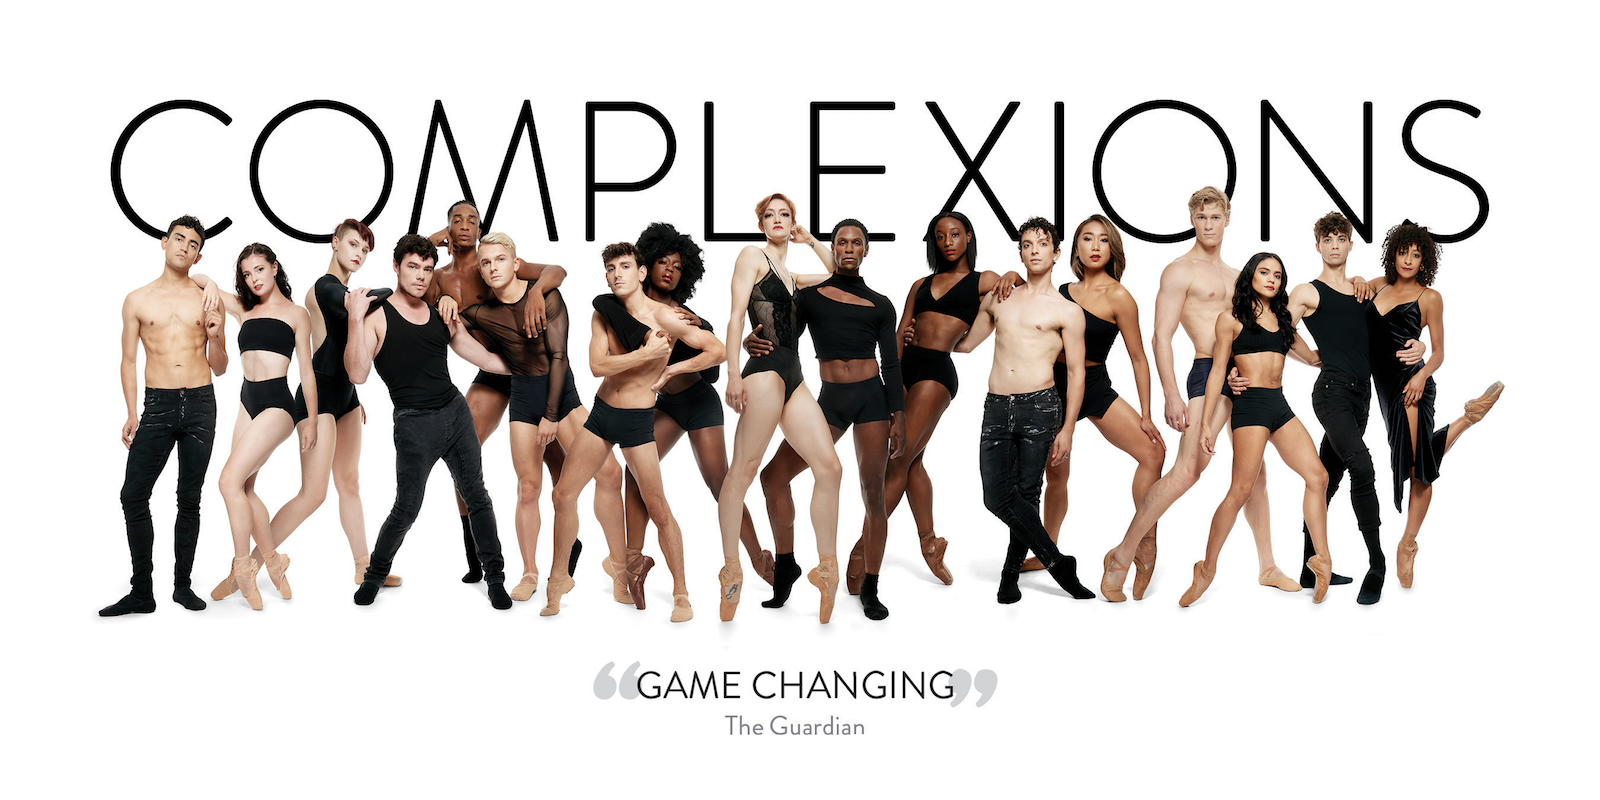 Complexions Contemporary Ballet is a globally renowned dance company, “reinventing” human movement from the ground up to integrate a mix of methods, styles, and cultures.